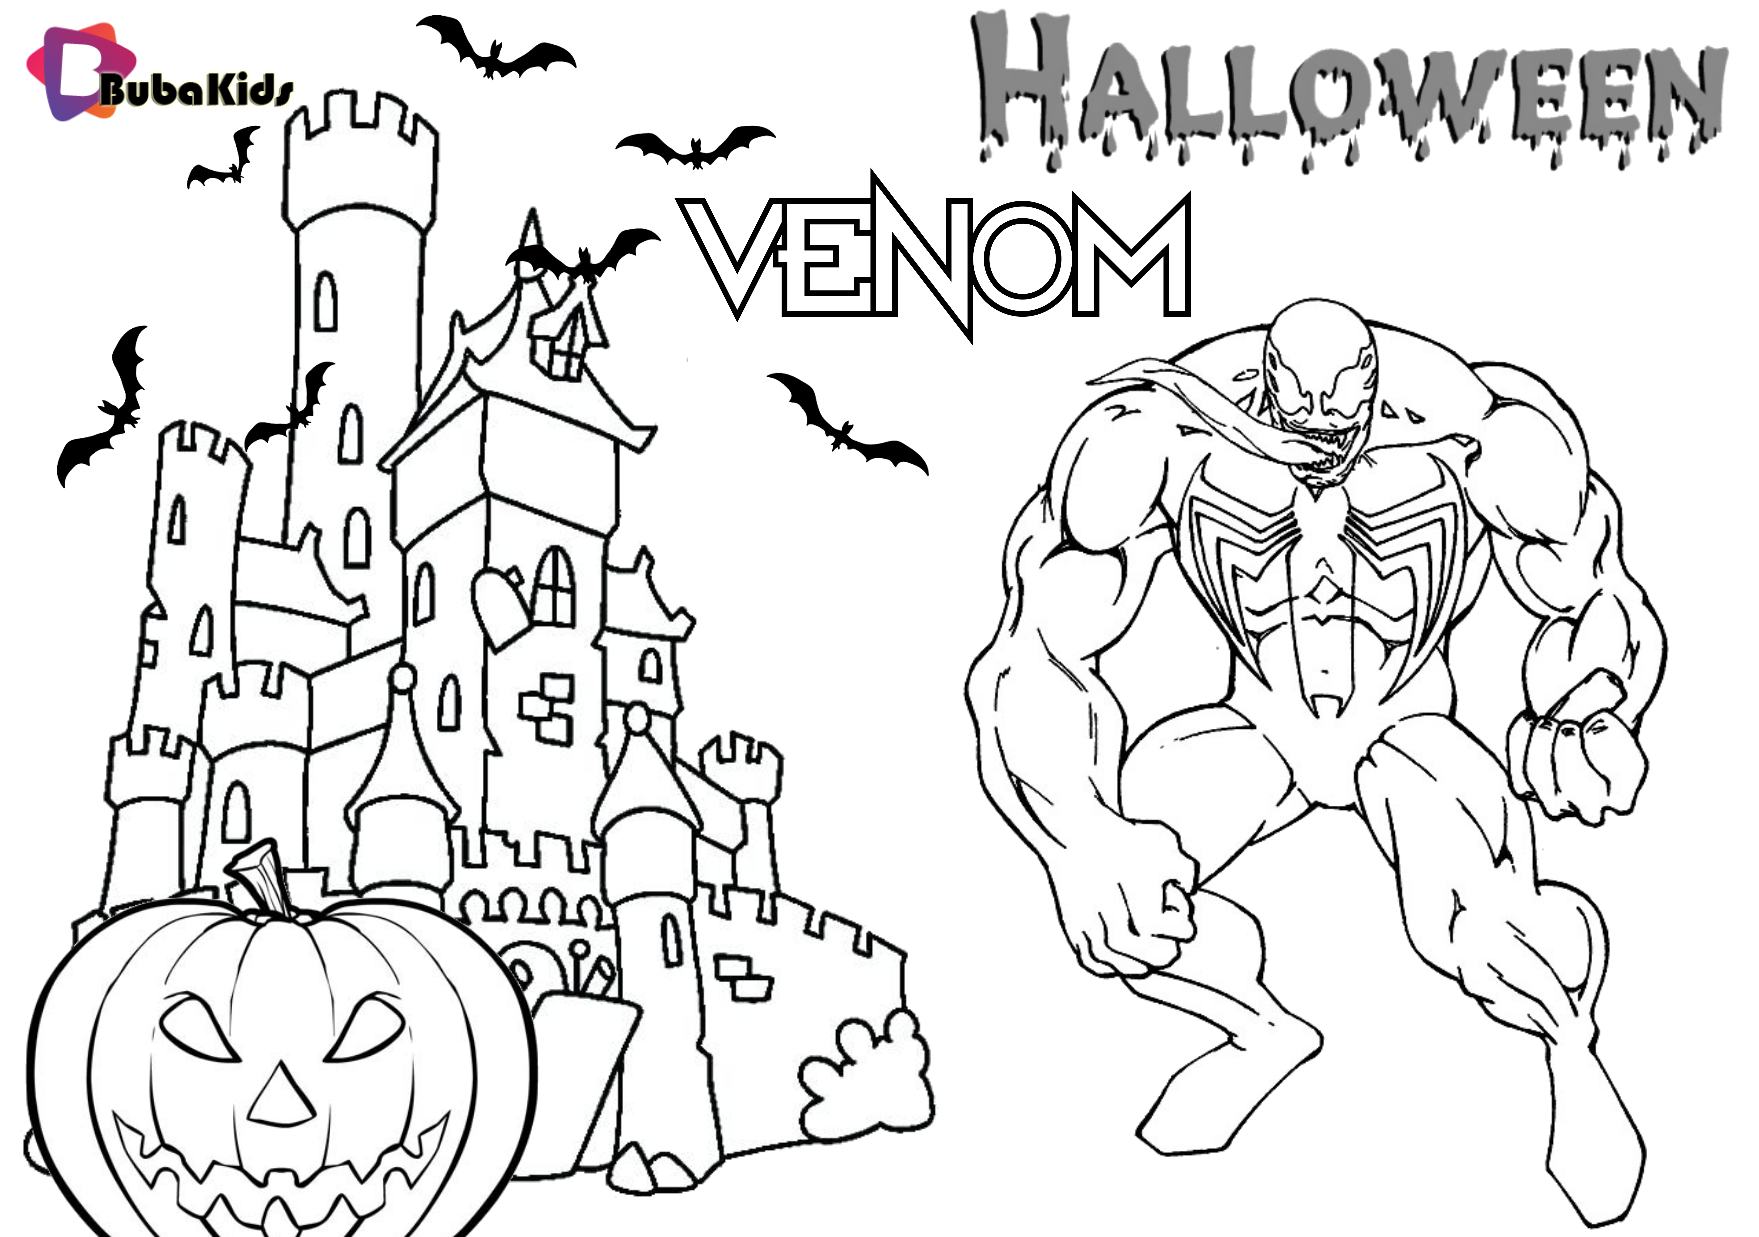 Halloween Party 2019 costume ideas venom costume printable coloring page Wallpaper